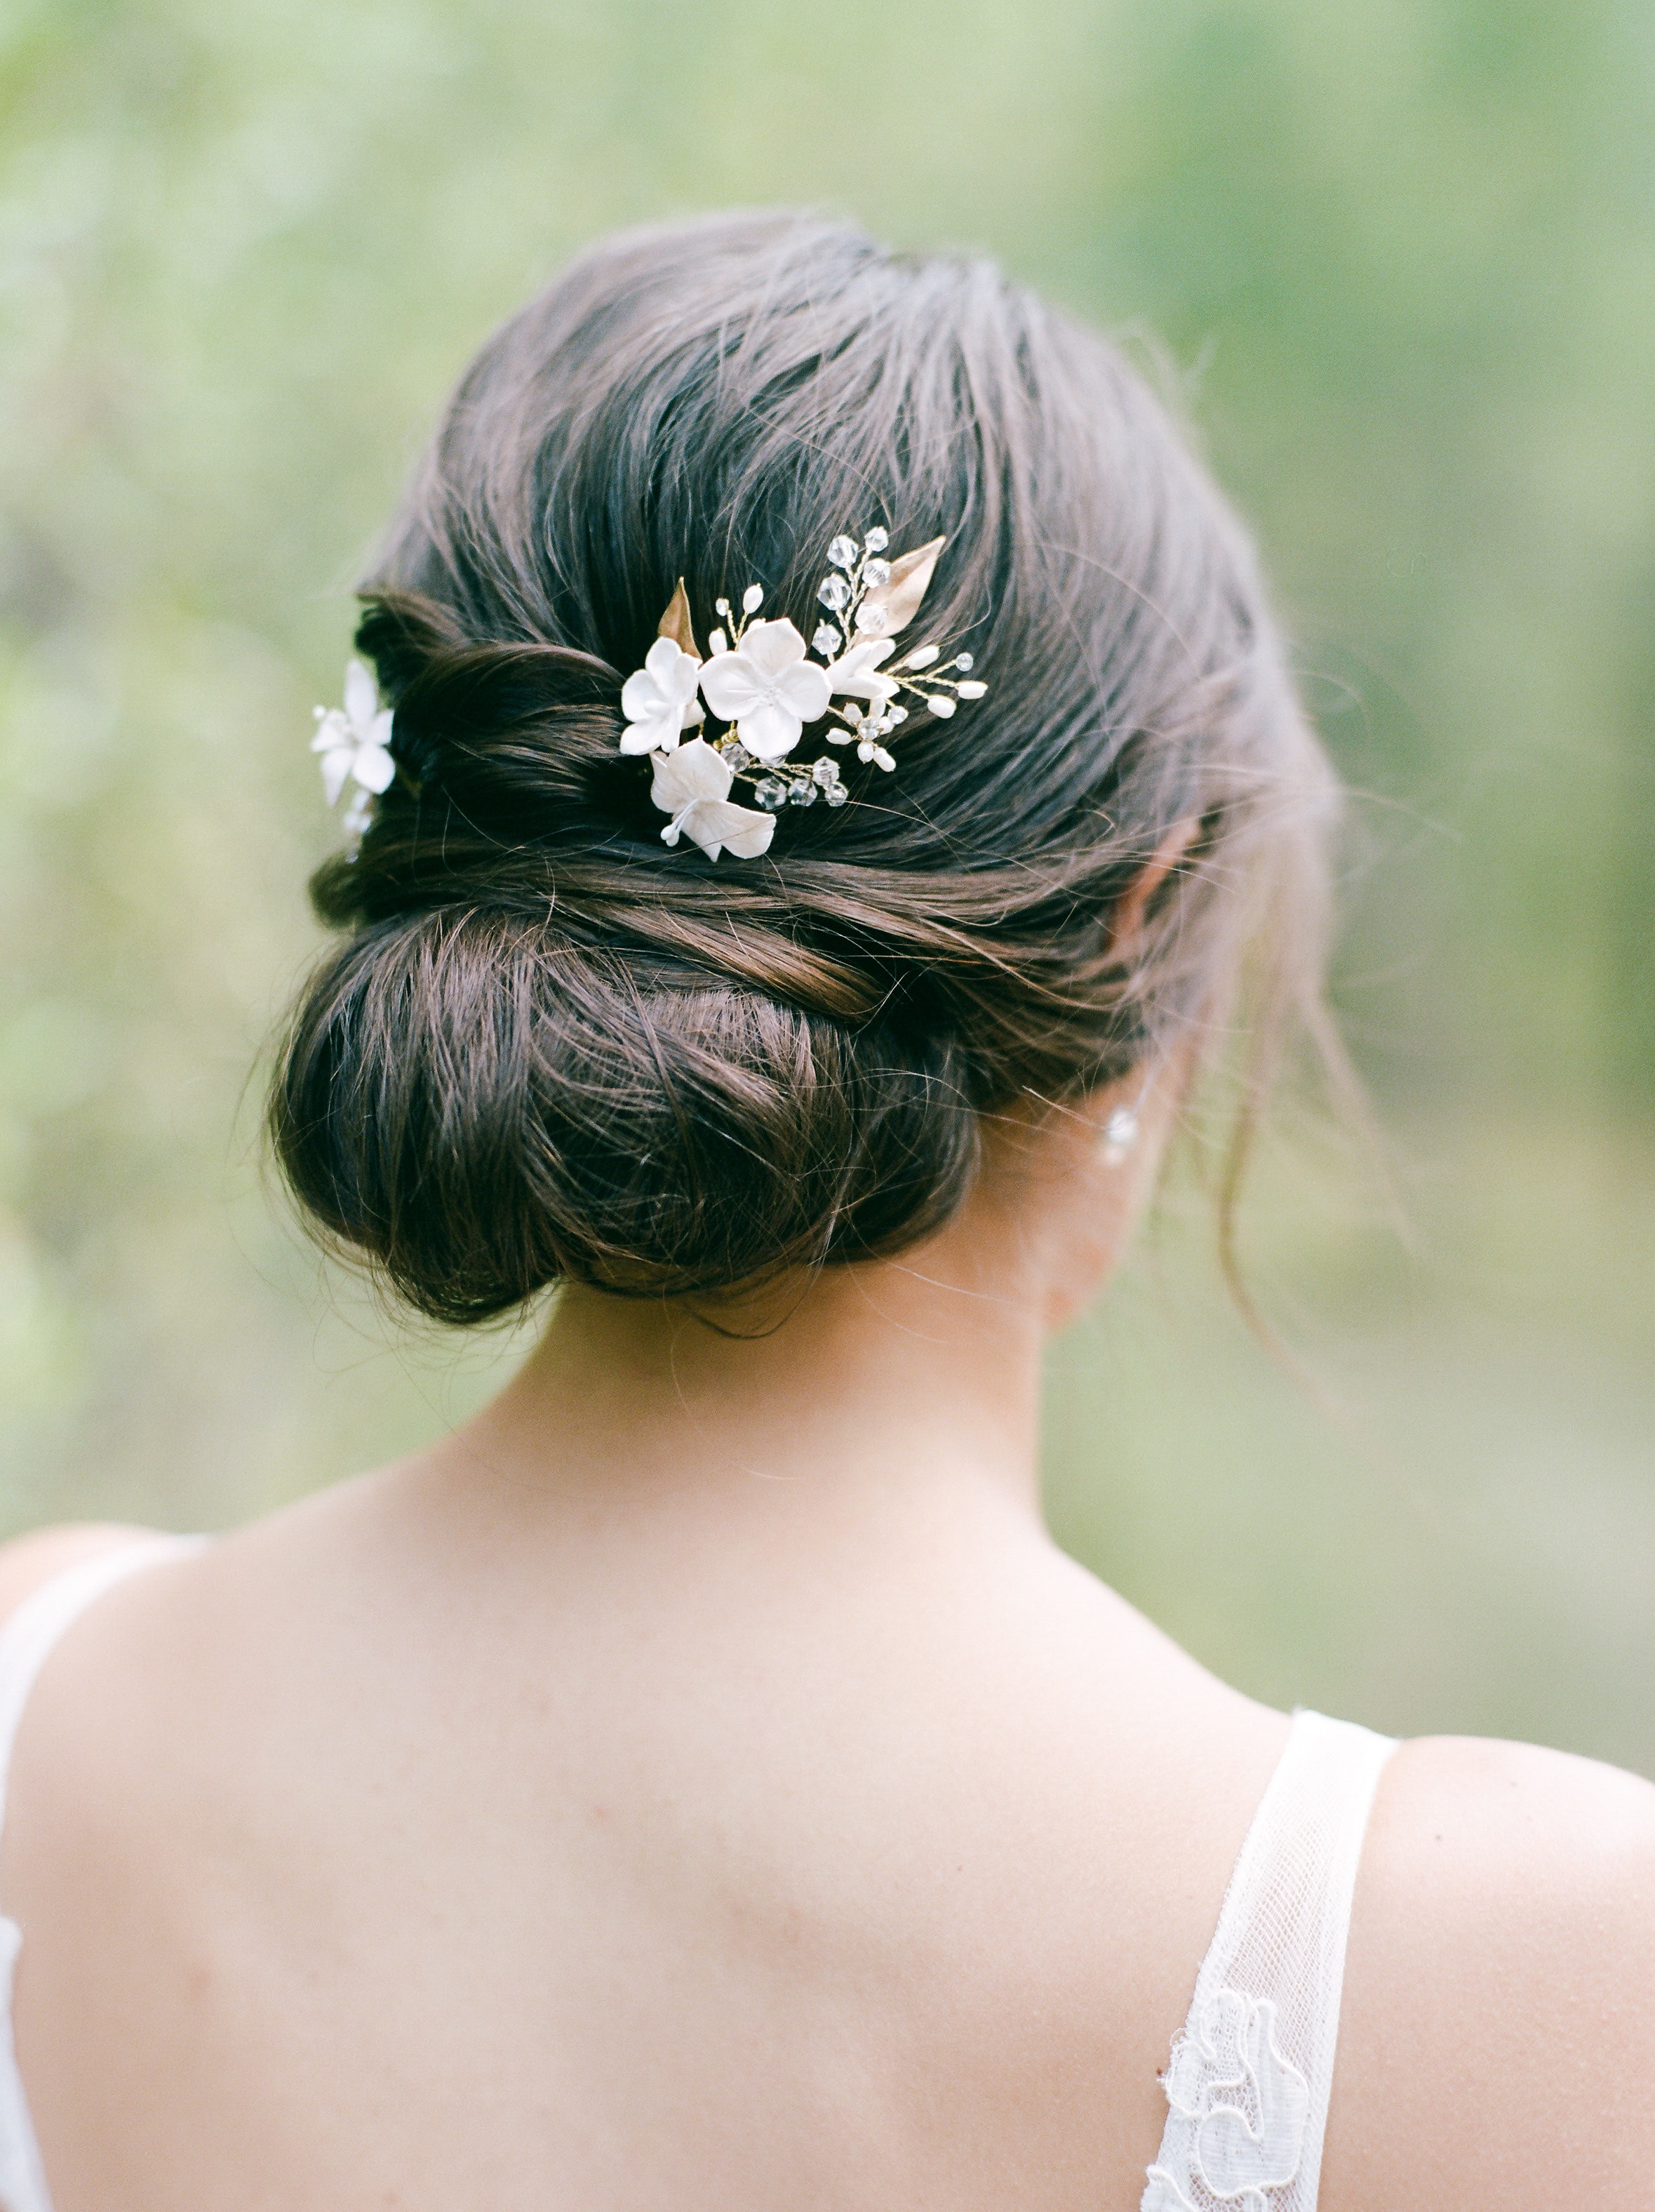 55 Simple Wedding Hairstyles That Prove Less Is More ...